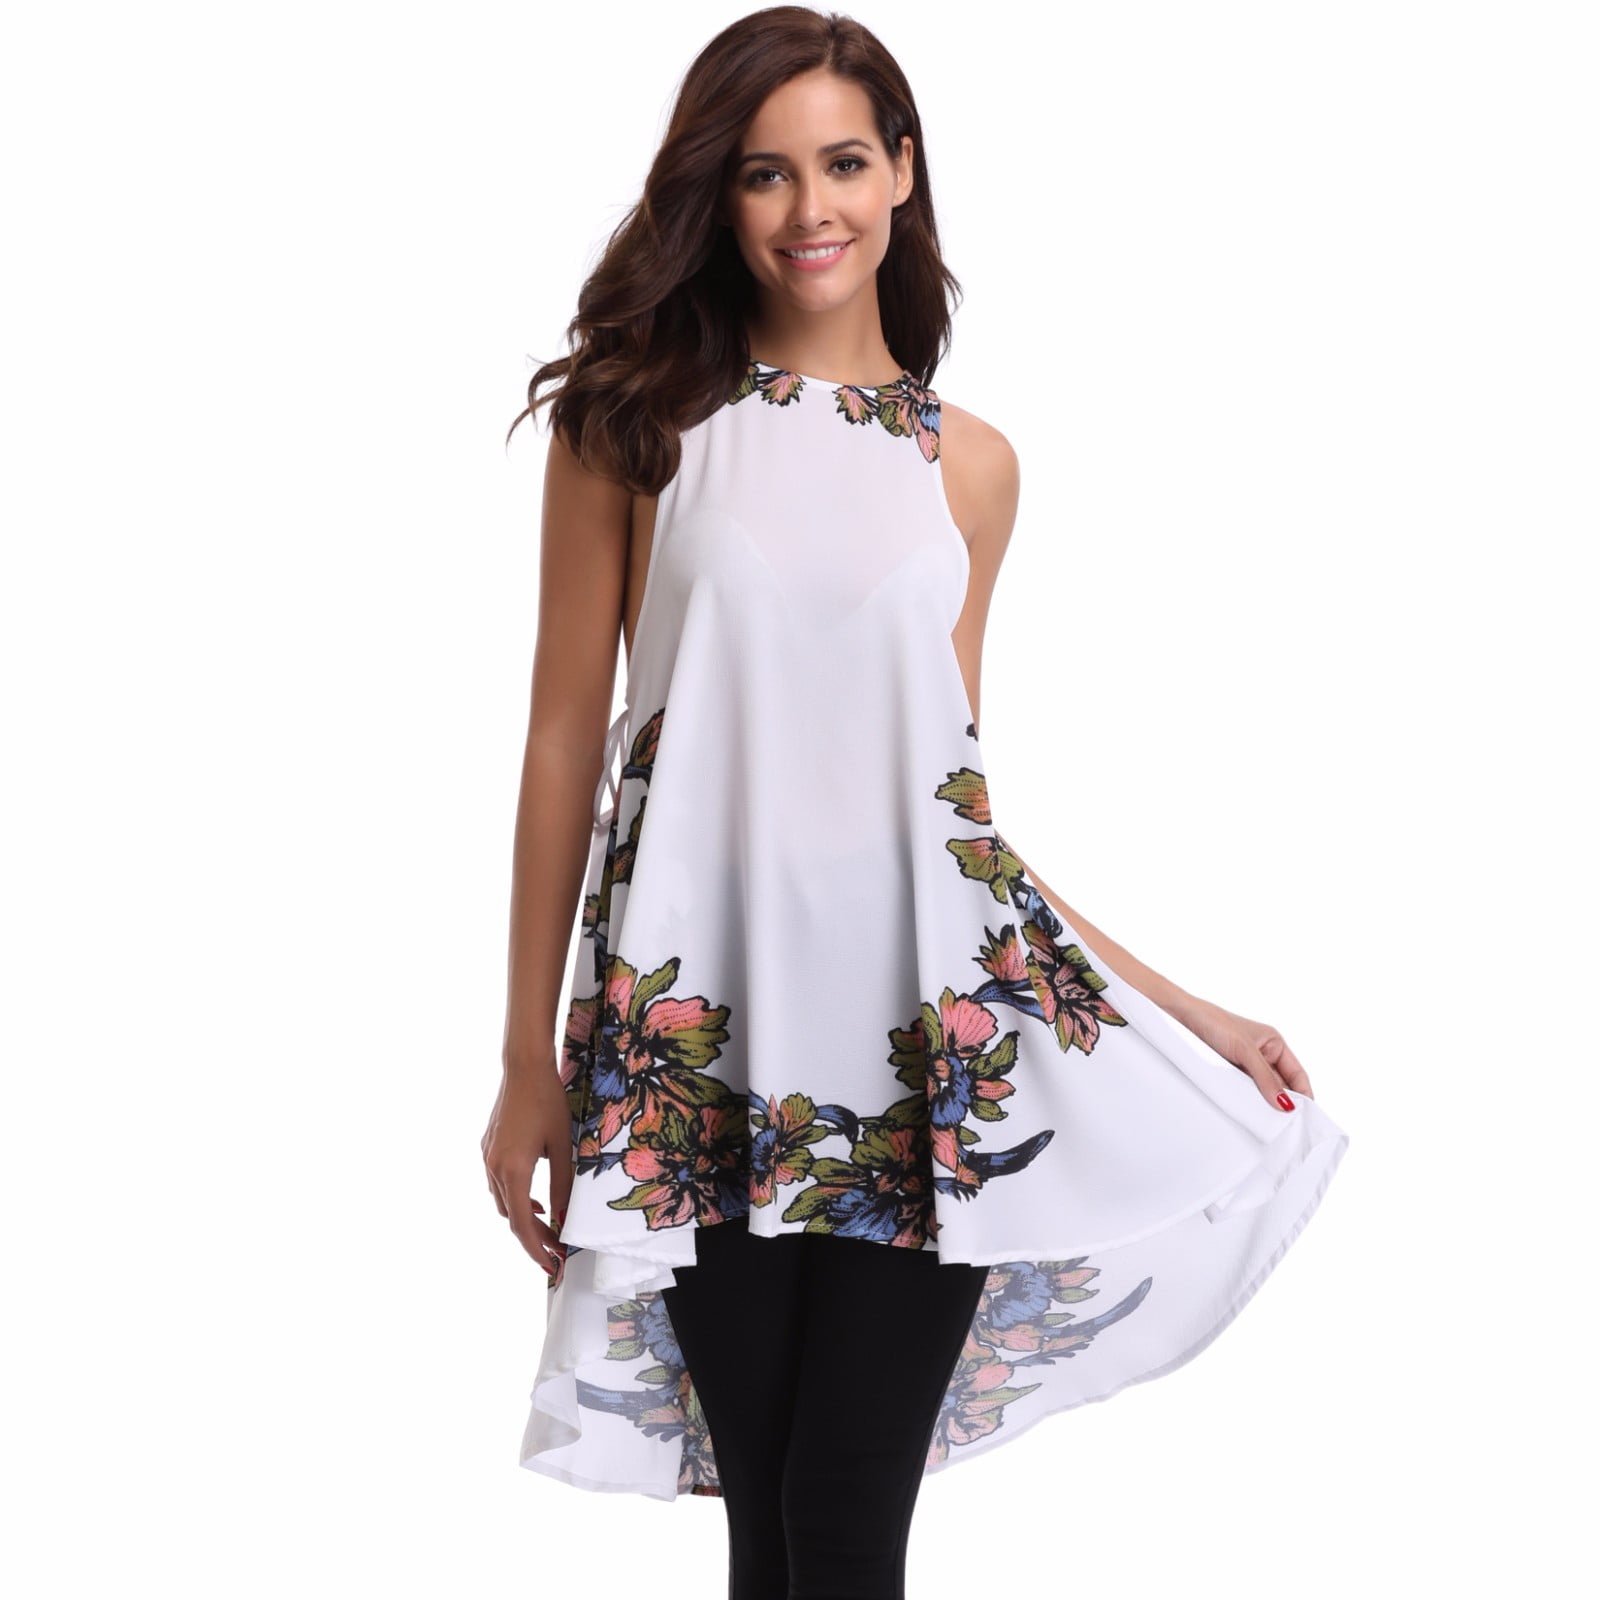 Miss Moly Women's Floral Printed Round Neck Sleeveless Tunic Sexy Tops ...